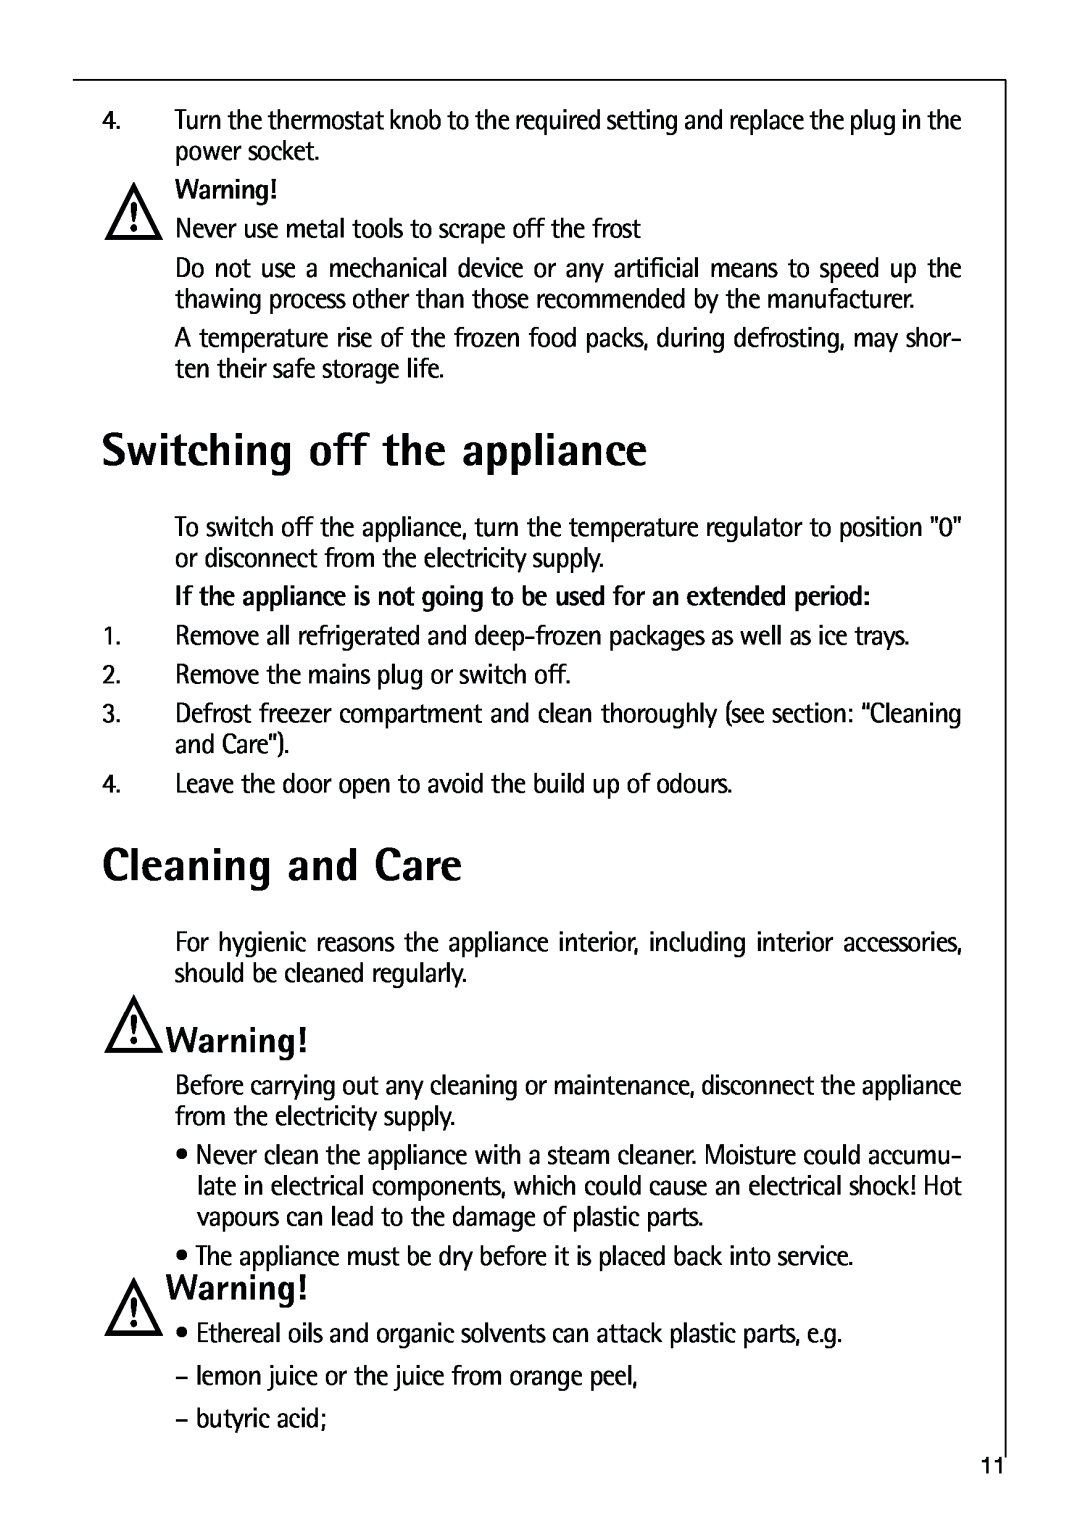 Parkinson Cowan SANTO K 40-5i, SANTO K 9, SANTO K 18 user manual Switching off the appliance, Cleaning and Care 